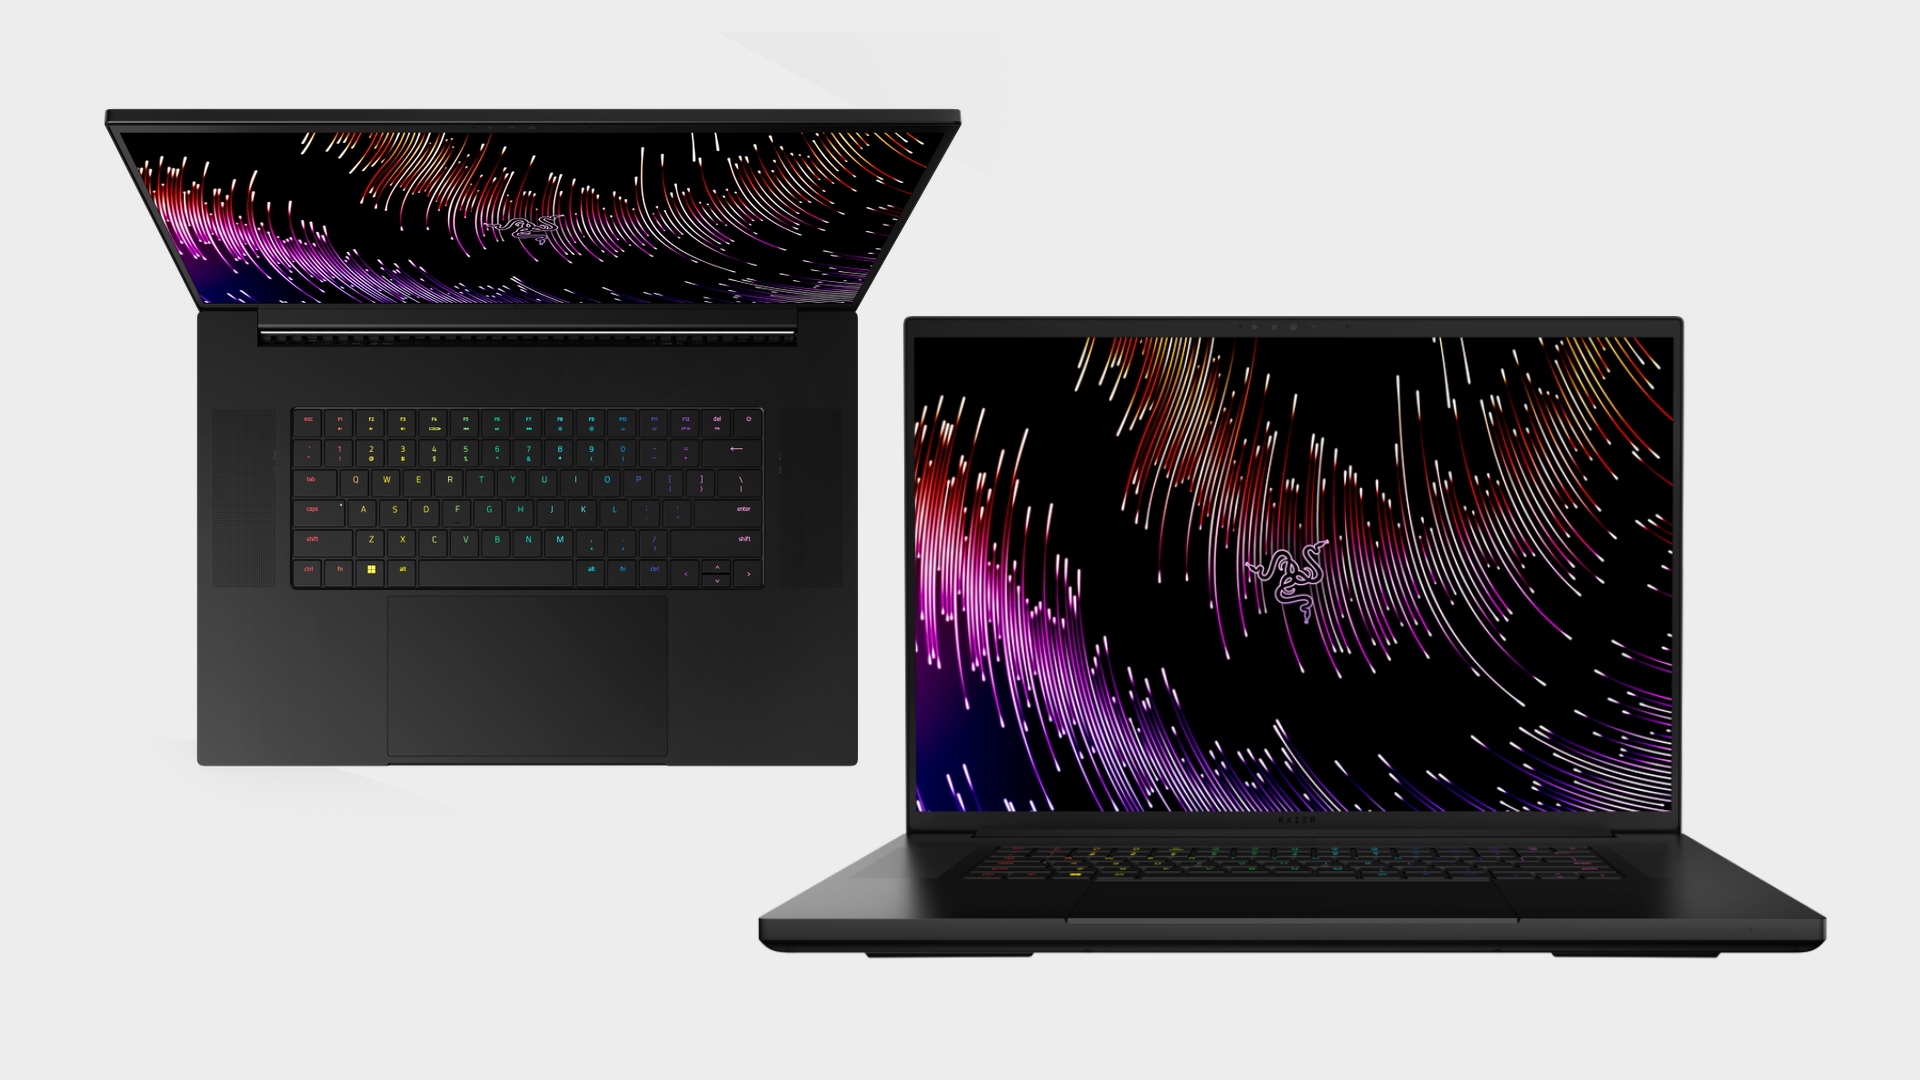 The Razer Blade 18 front and top view.